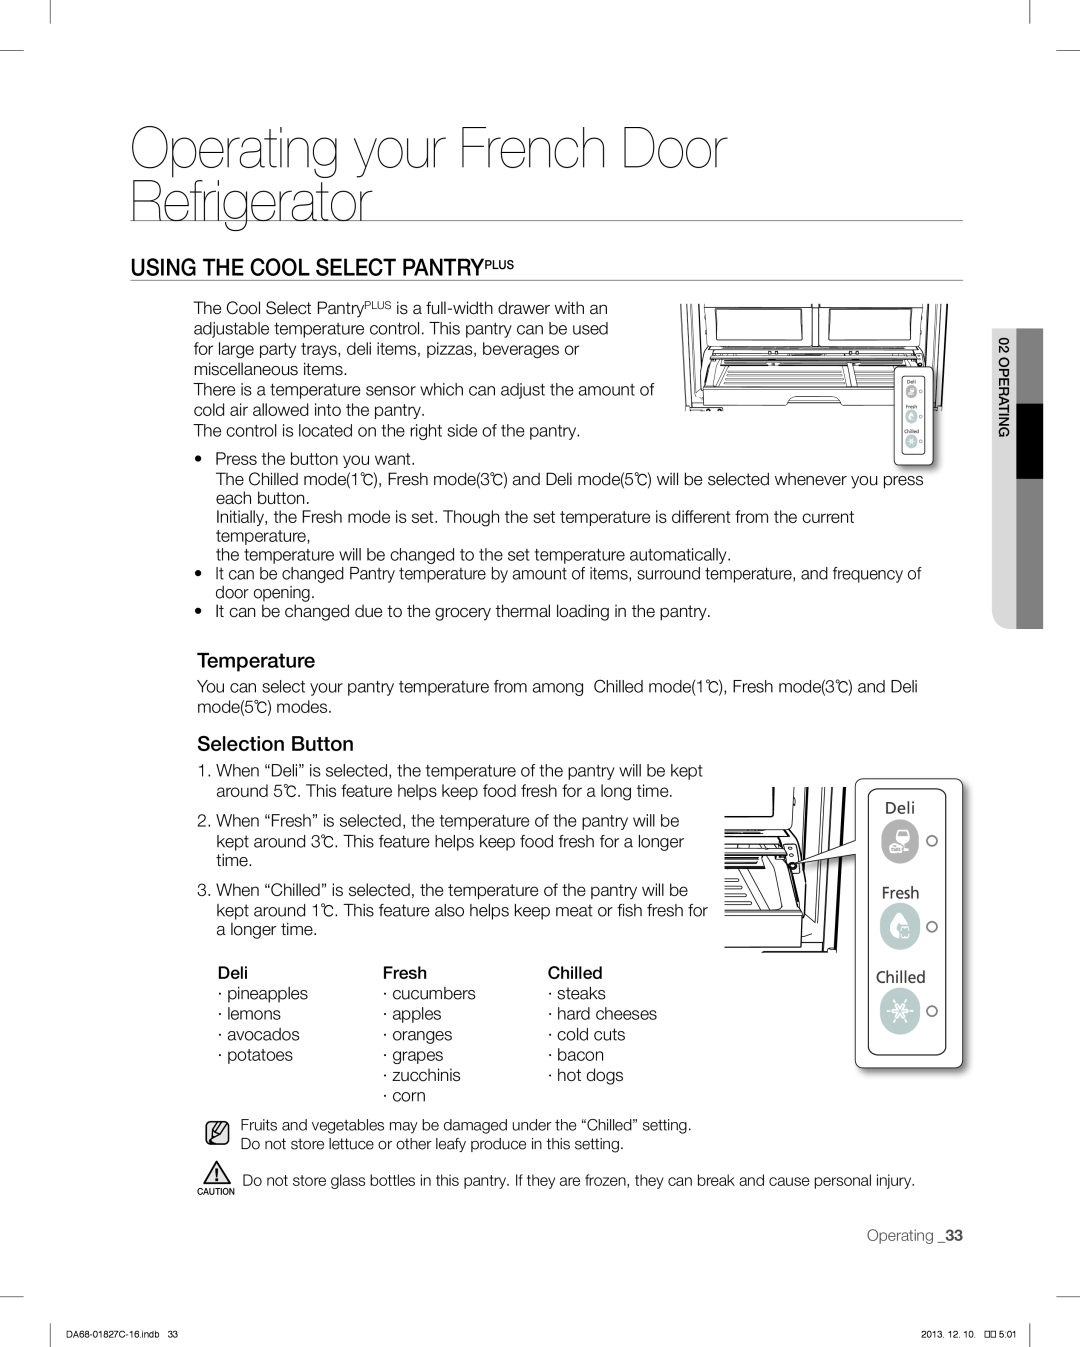 Samsung RFG237AARS user manual Using The Cool Select Pantryplus, Operating your French Door Refrigerator, Temperature 